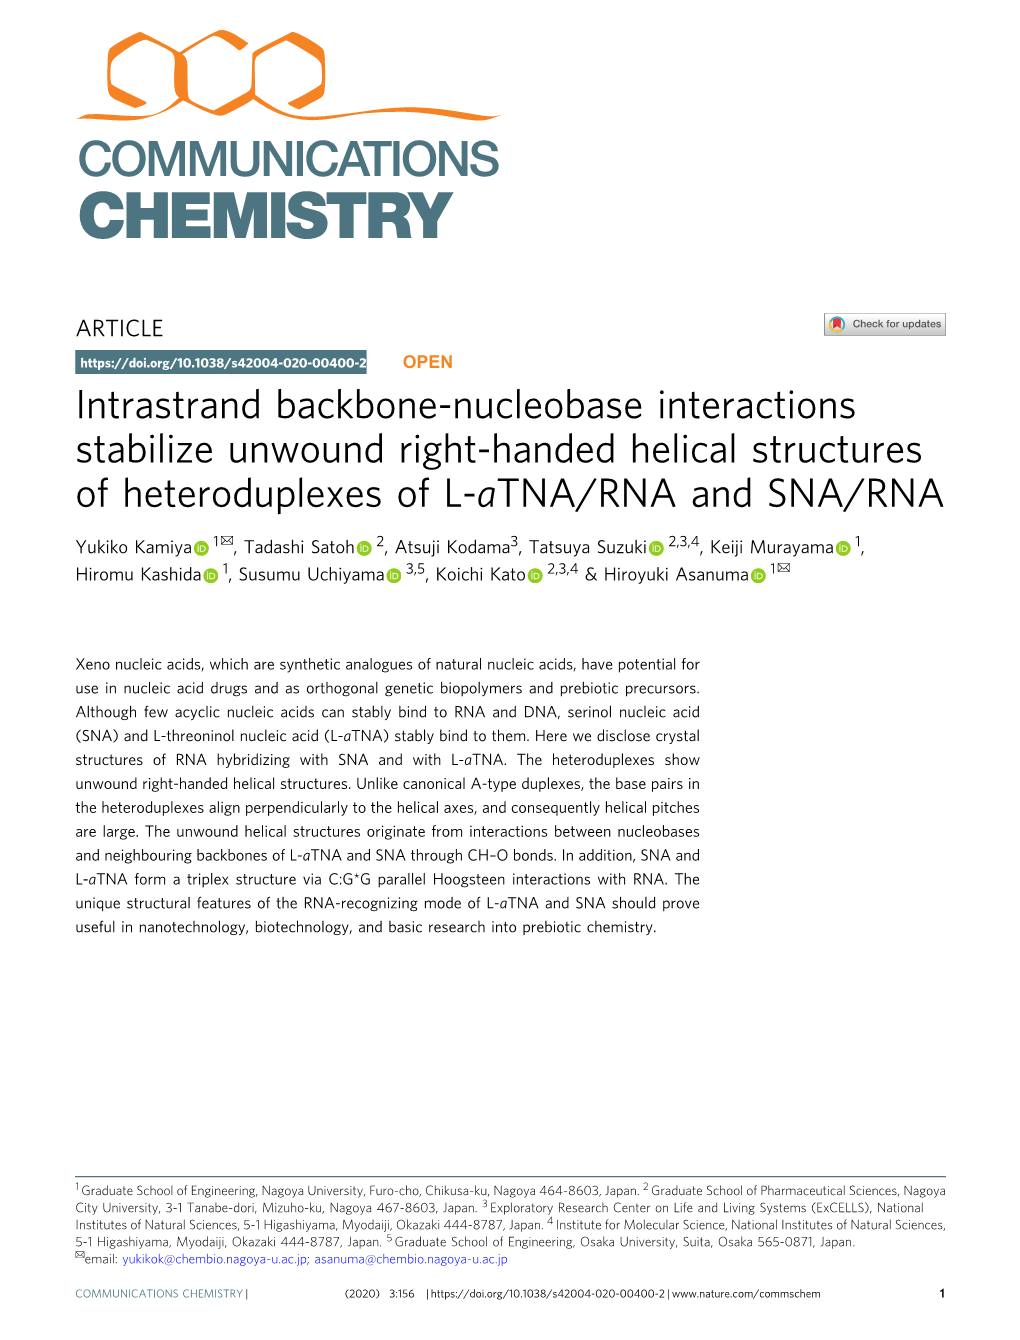 Intrastrand Backbone-Nucleobase Interactions Stabilize Unwound Right